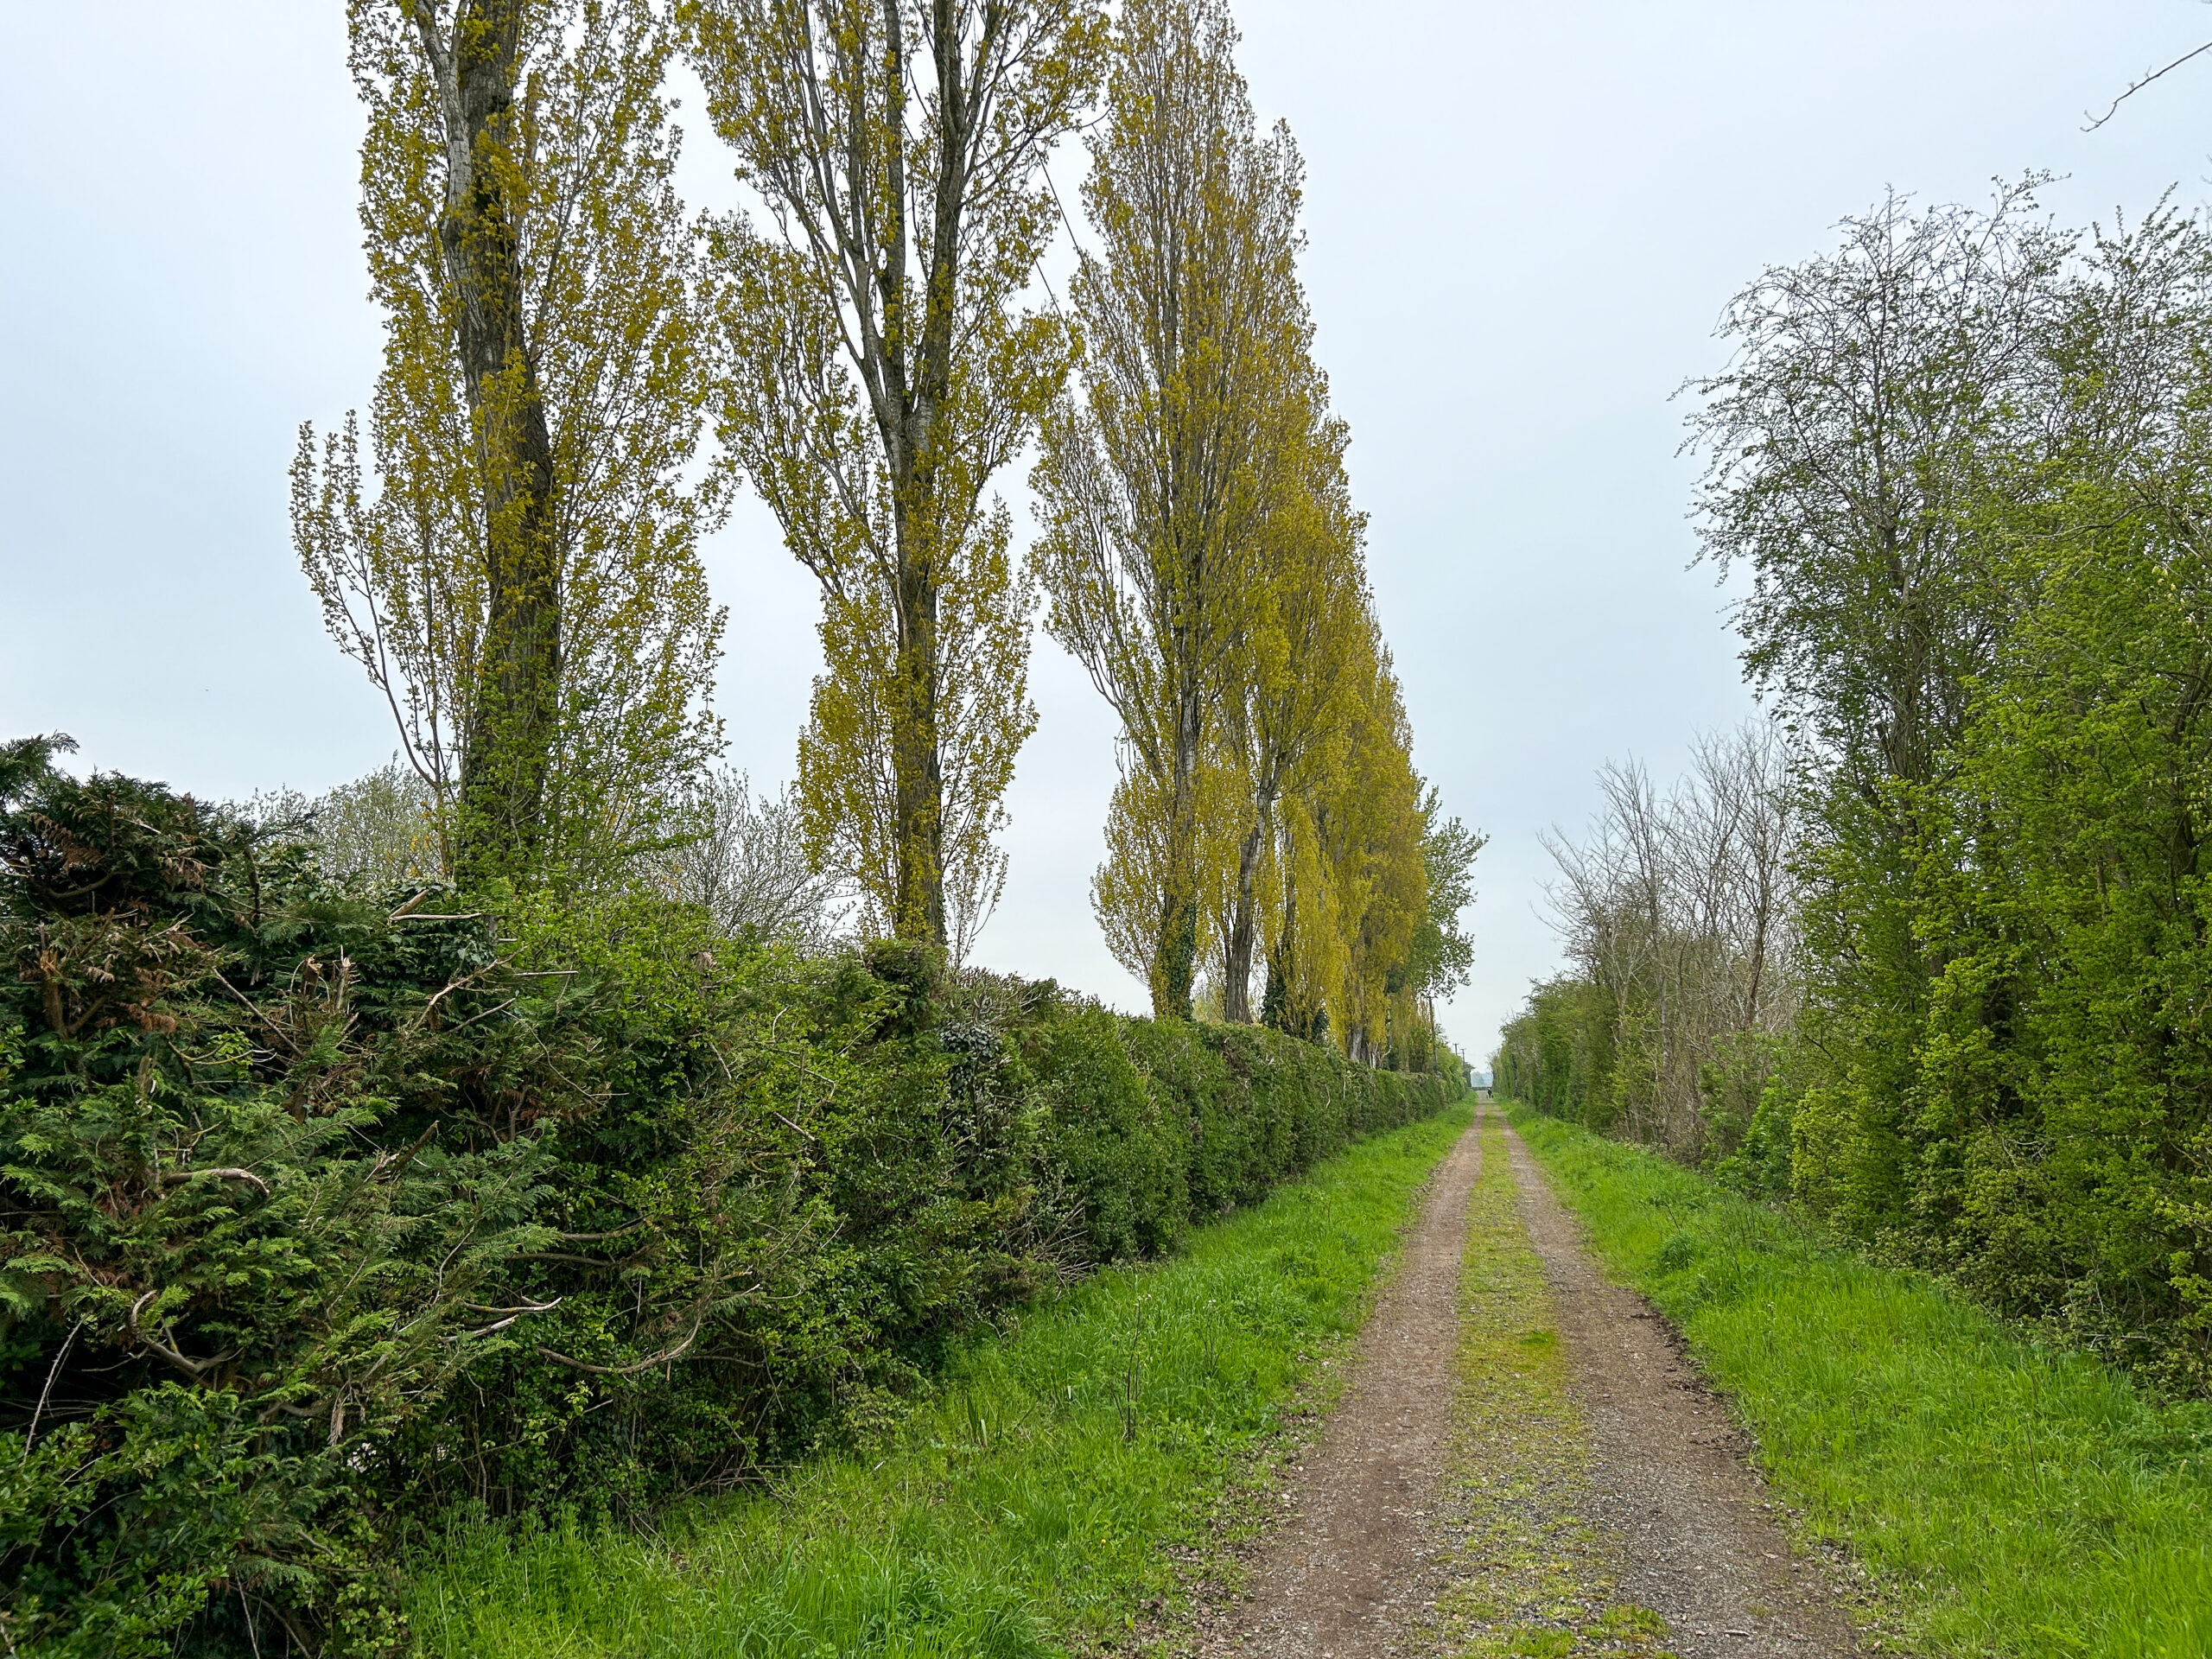 A dusty track running in a straight line with hedges on both sides and tall, narrow, straight trees behind the left hand hedge.